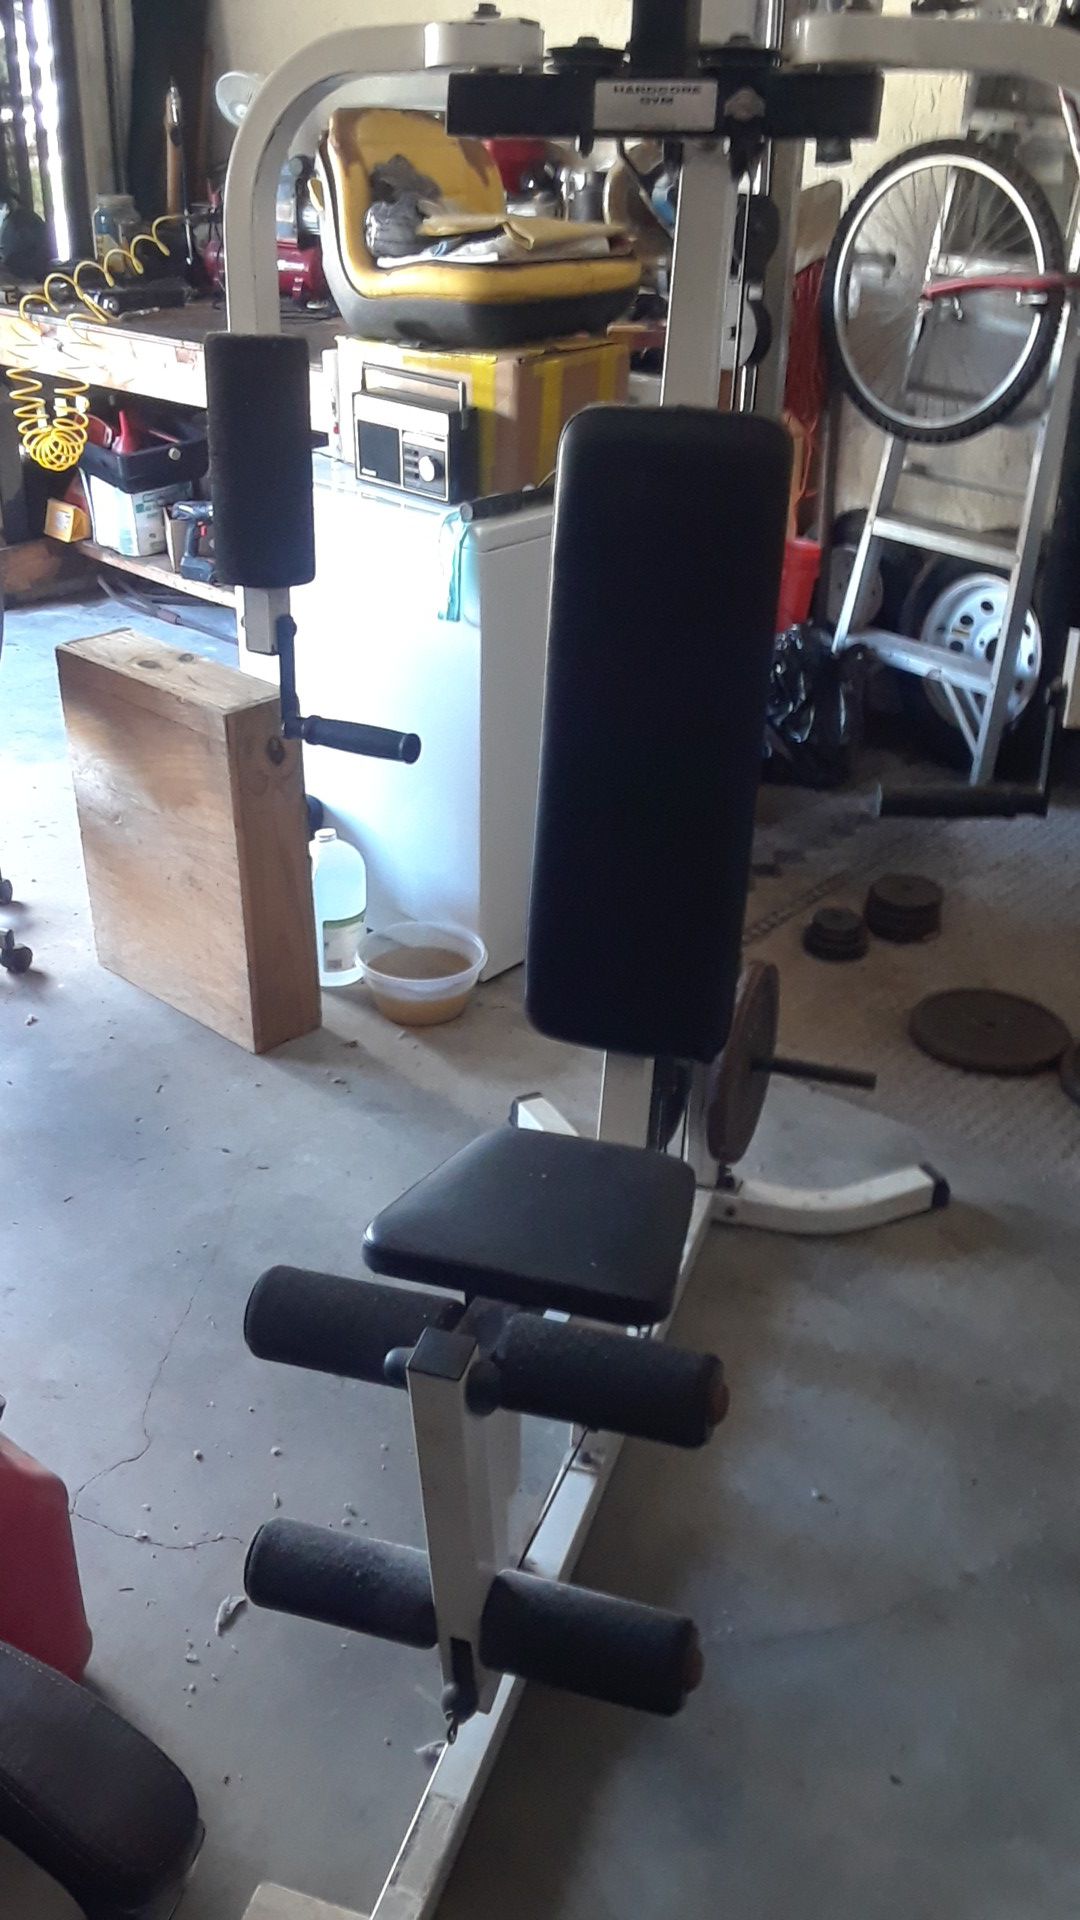 Hardcore gym fitness station with 50 lb of weight